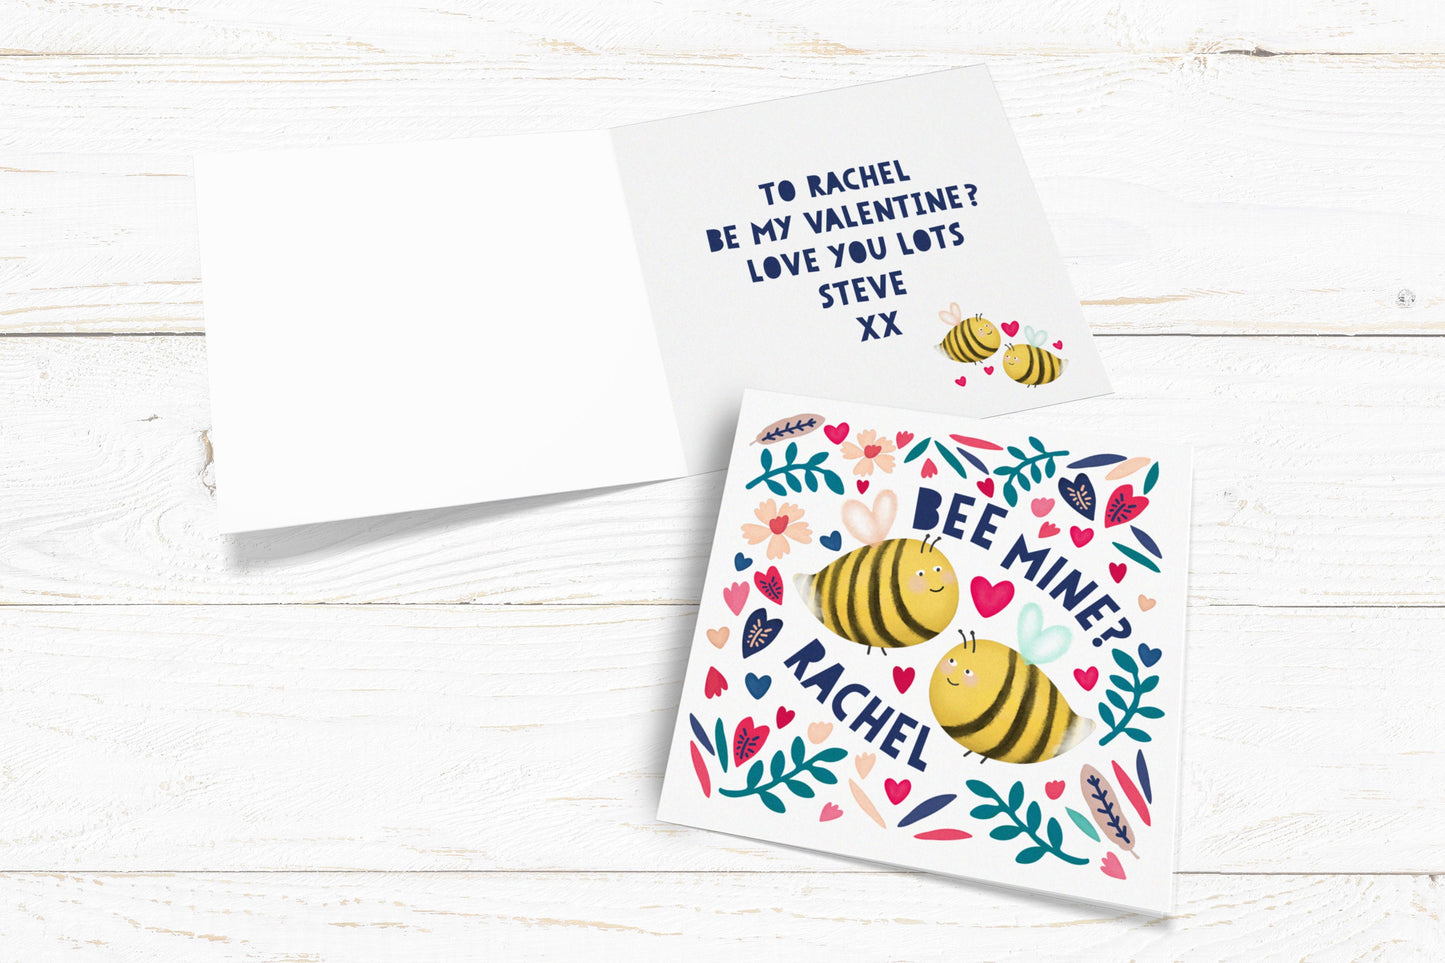 Bee Mine Personalised Card. Valentine's Card. Cute Love Card. Personalised Valentines Card. Cute Bee Card. Send Direct Option.